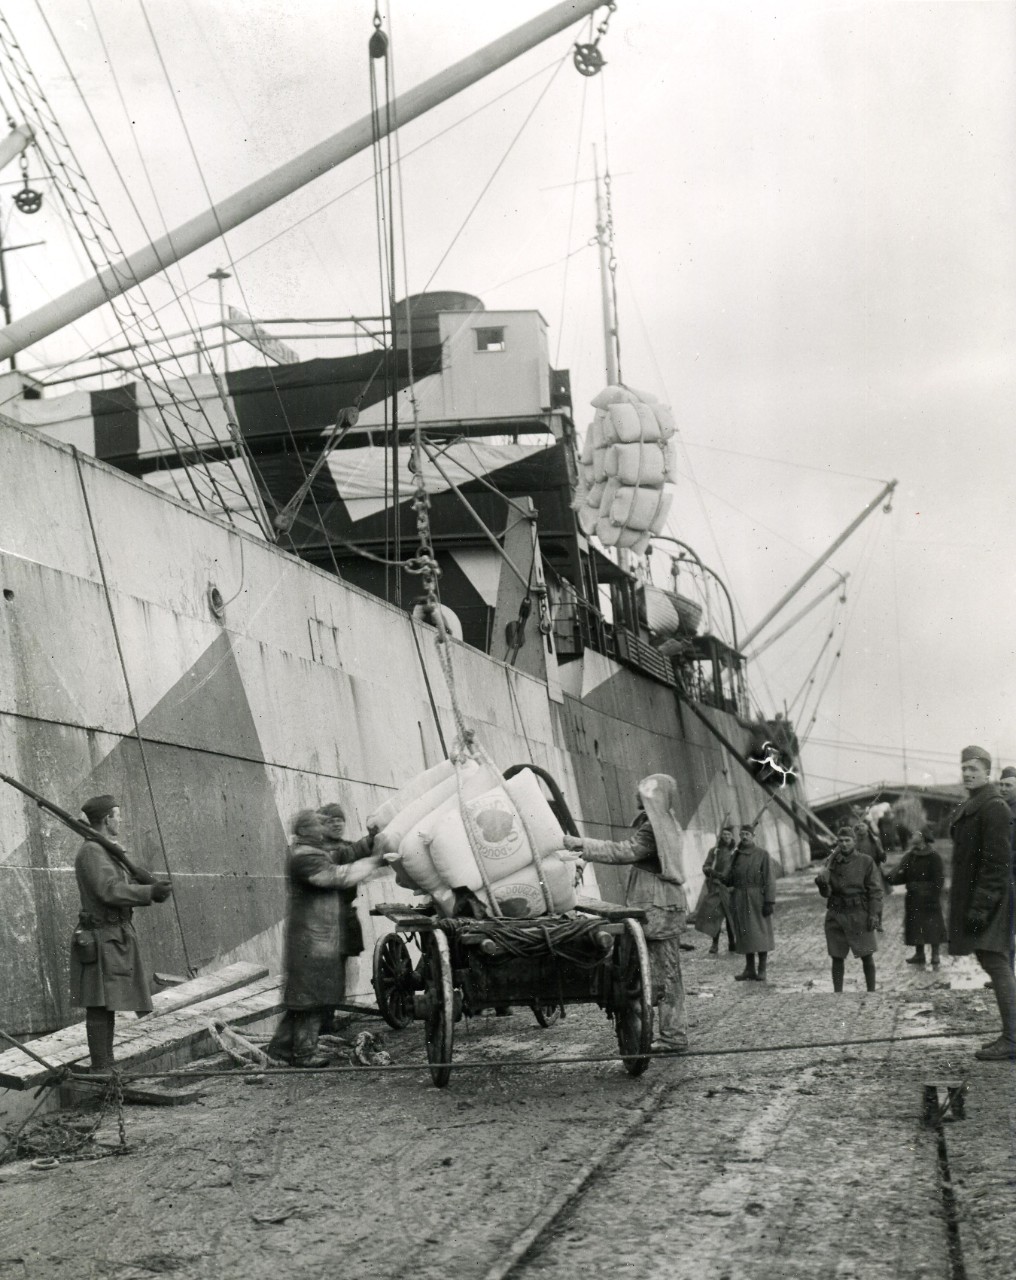 <p>111-SC-34629: Russian Intervention, 1918-20. Unloading grain from U.S. Cargo Ship Ascutney, at Archangel, 15 October 1918. Note, U.S. Army guards on pier. U.S. Army photograph, now in the collections of the U.S. National Archives. Copy of print located at NHHC.</p>
